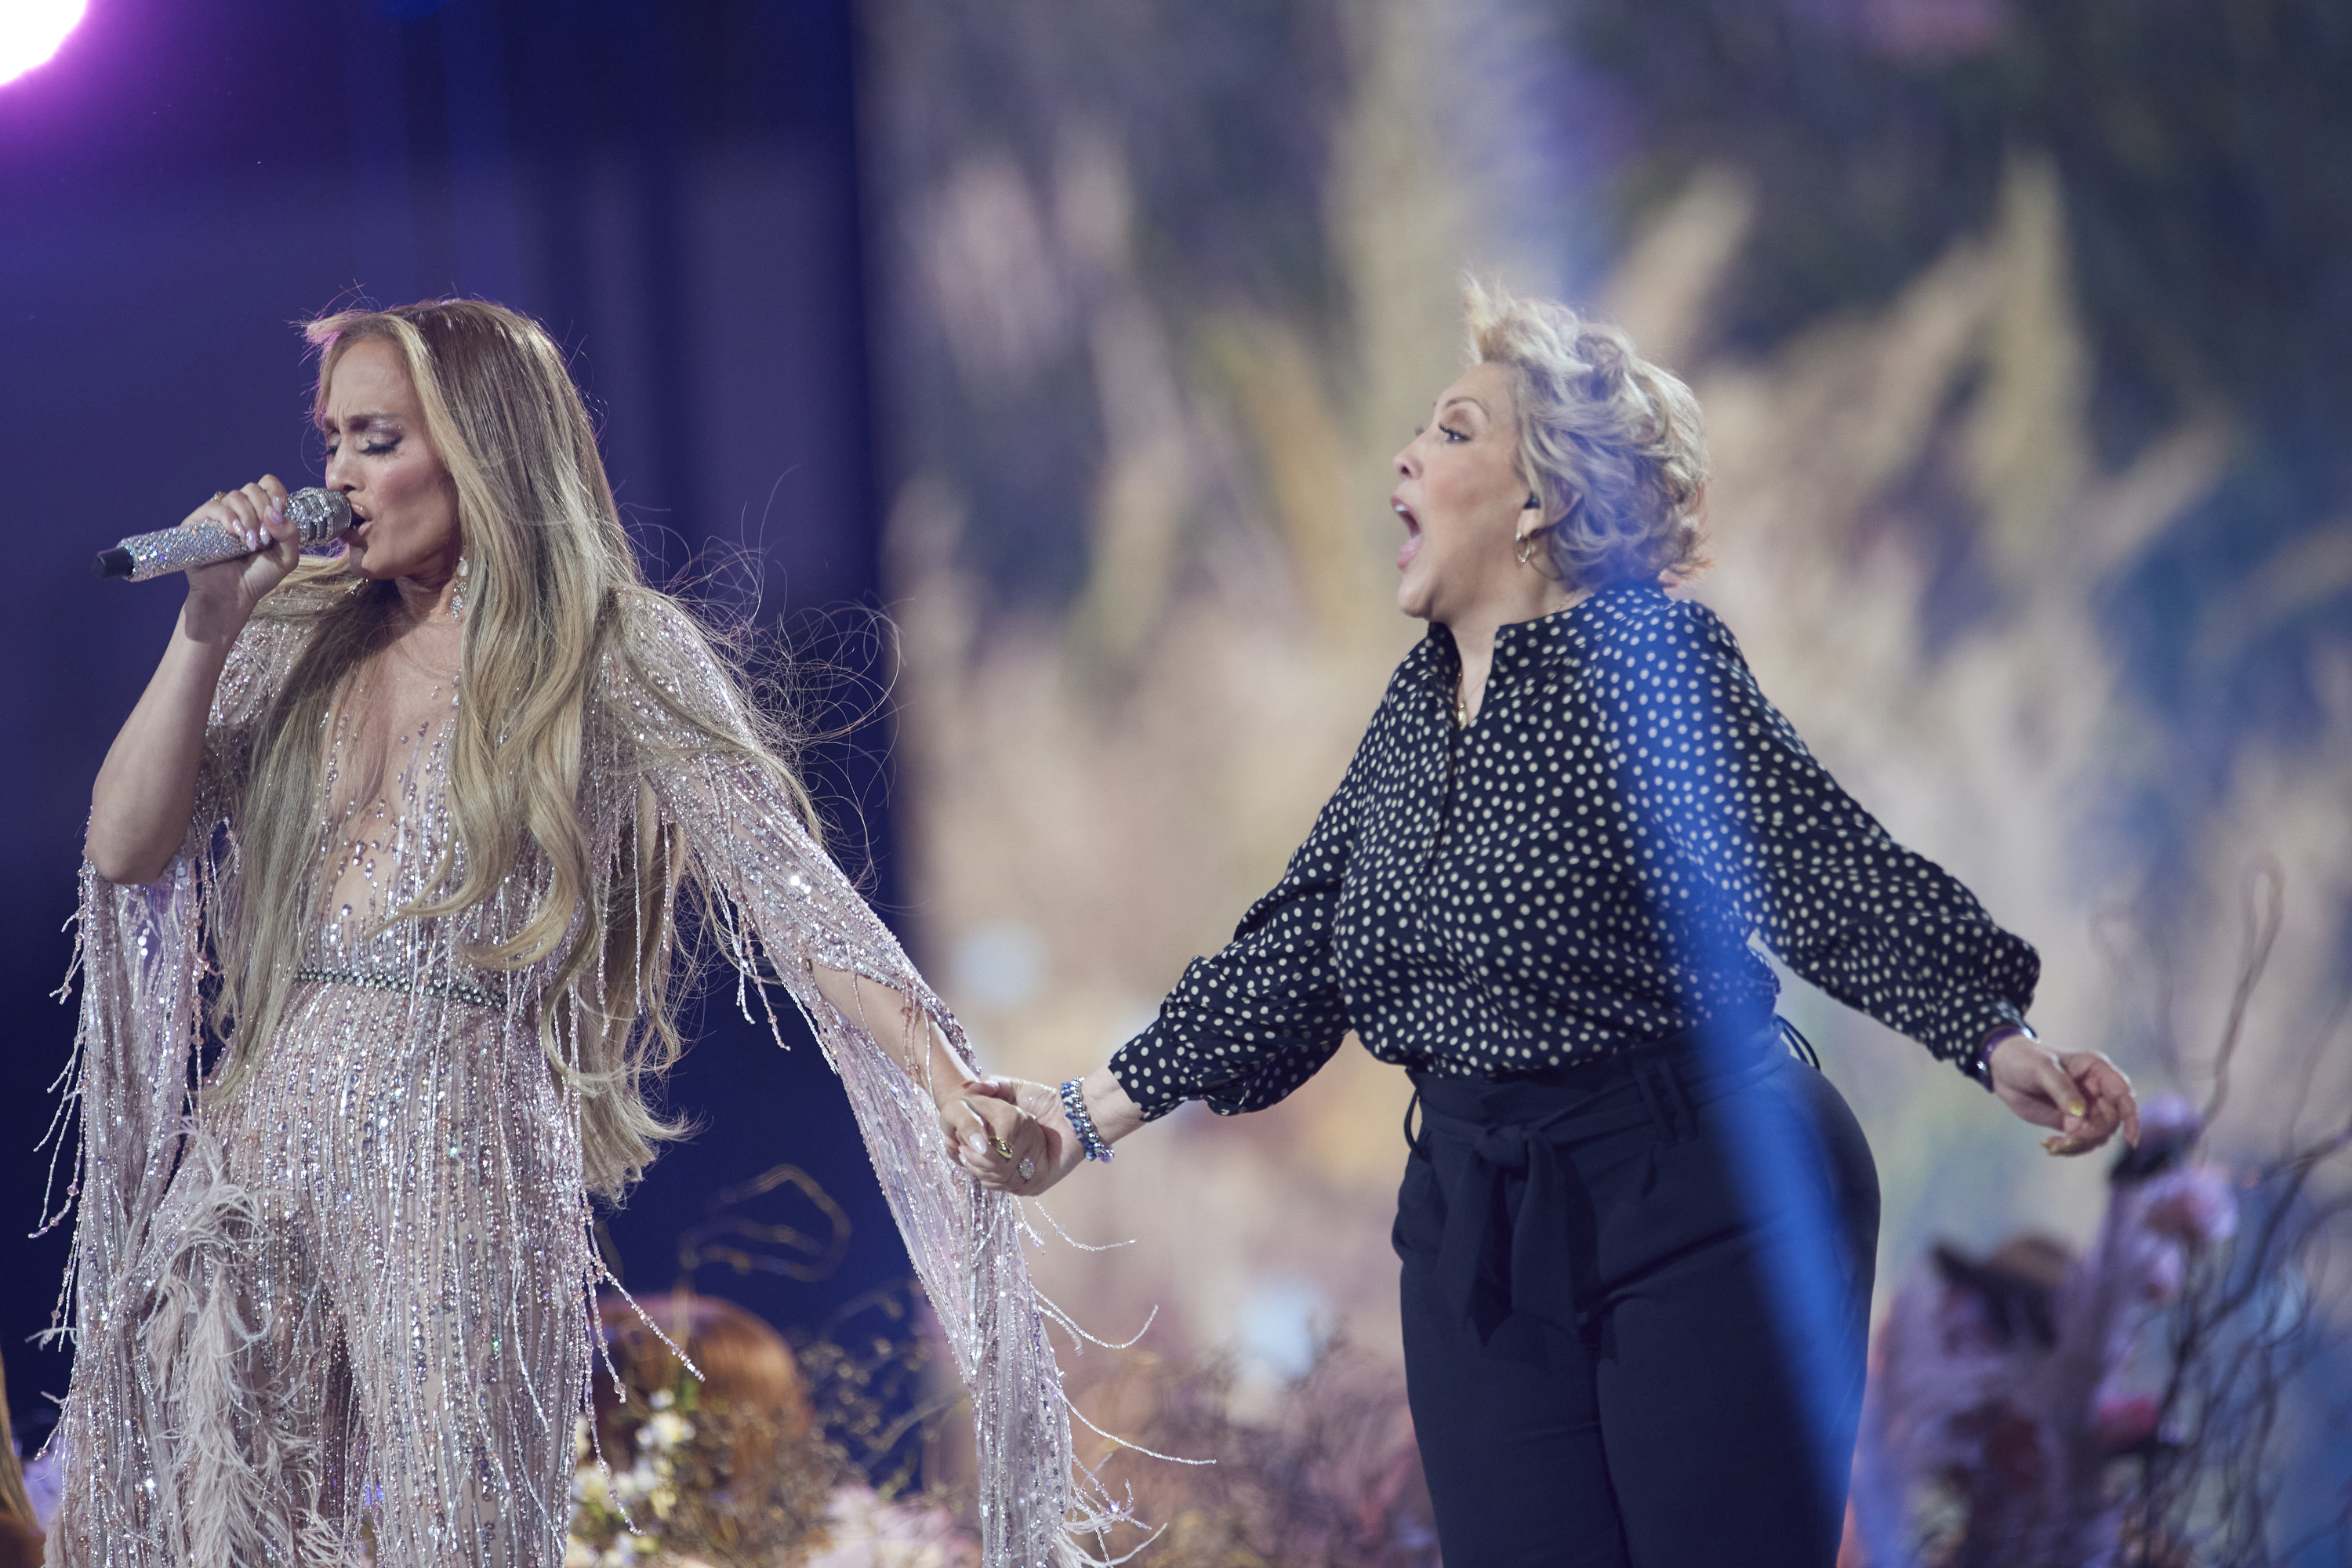 Jennifer Lopez and her mom perform at Global Citizen’s Vax Live, at SoFi Stadium in Inglewood, California, on May 2, 2021. | Source: Getty Images